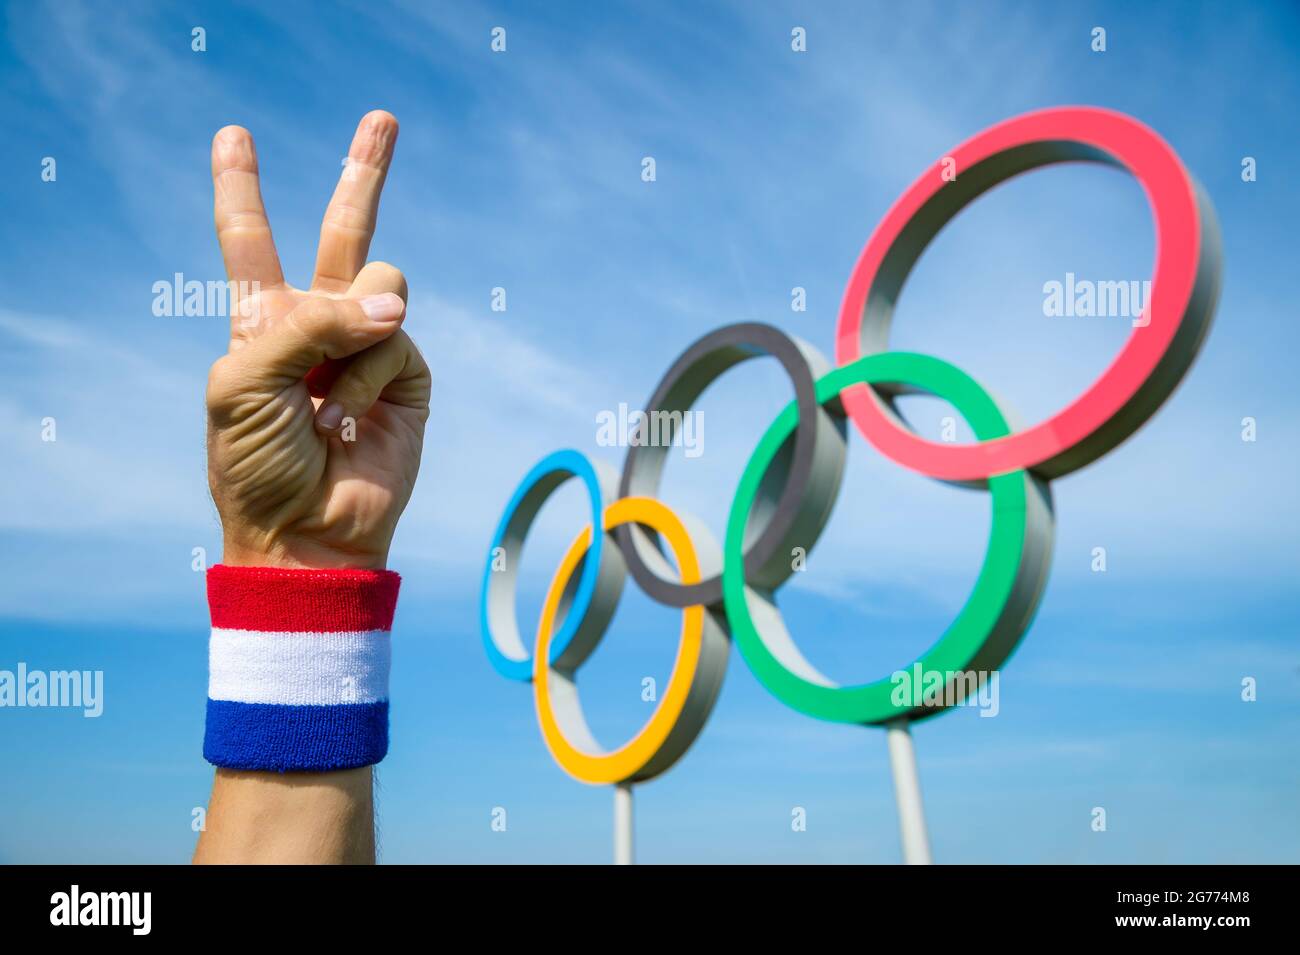 RIO DE JANEIRO - CIRCA MAY, 2016: A hand wearing red white and blue wristband makes a victory sign in front of Olympic Rings Stock Photo